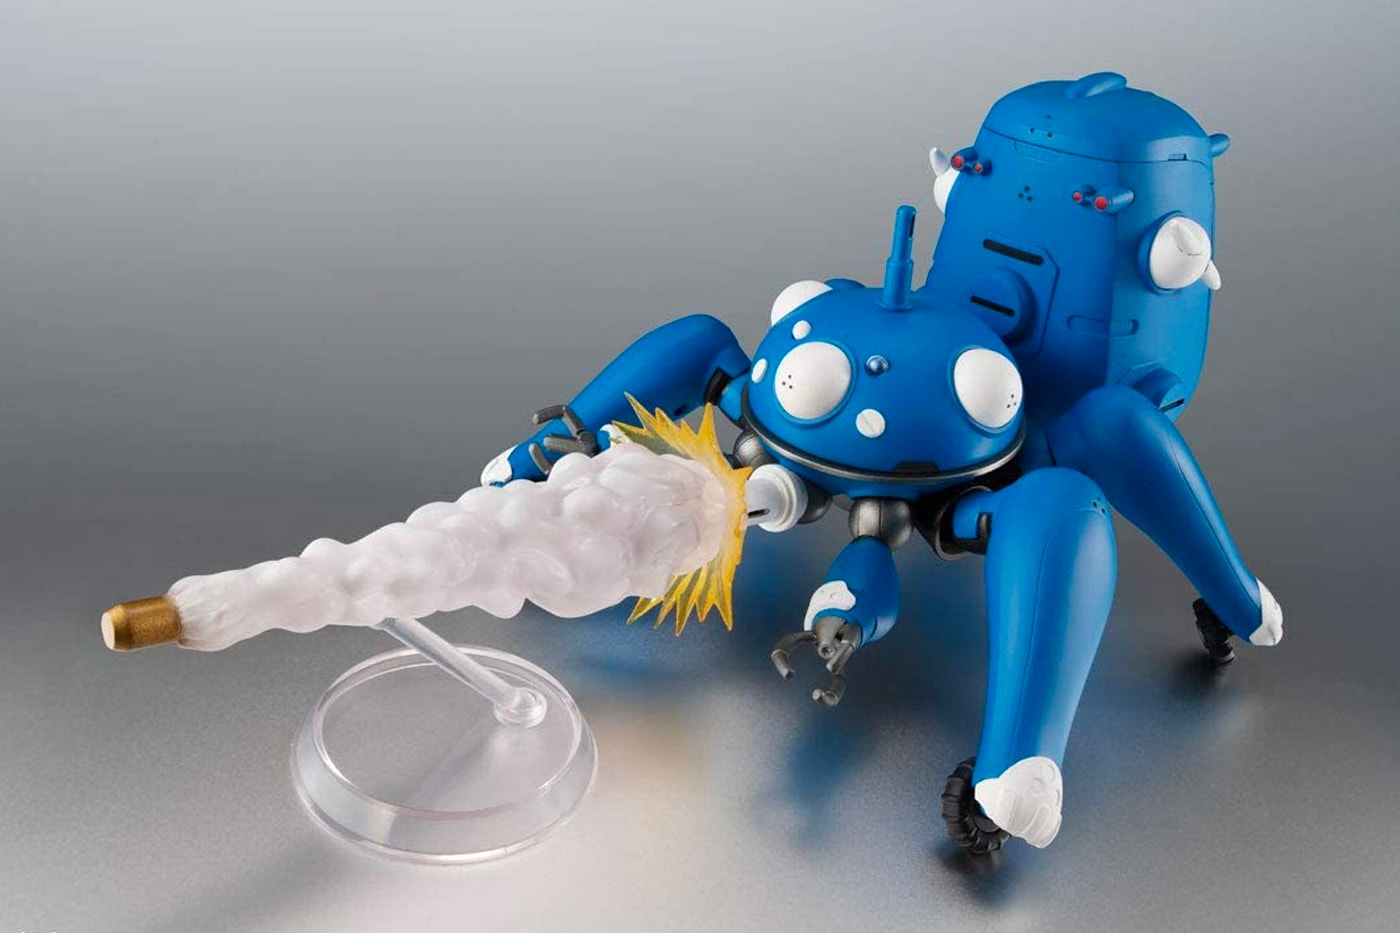 Bandai Spirits ROBOT Tamashii Attack Shell Mobile Squad Ghost in the Shell S.A.C. 2nd GIG & SAC_2045 Figure release